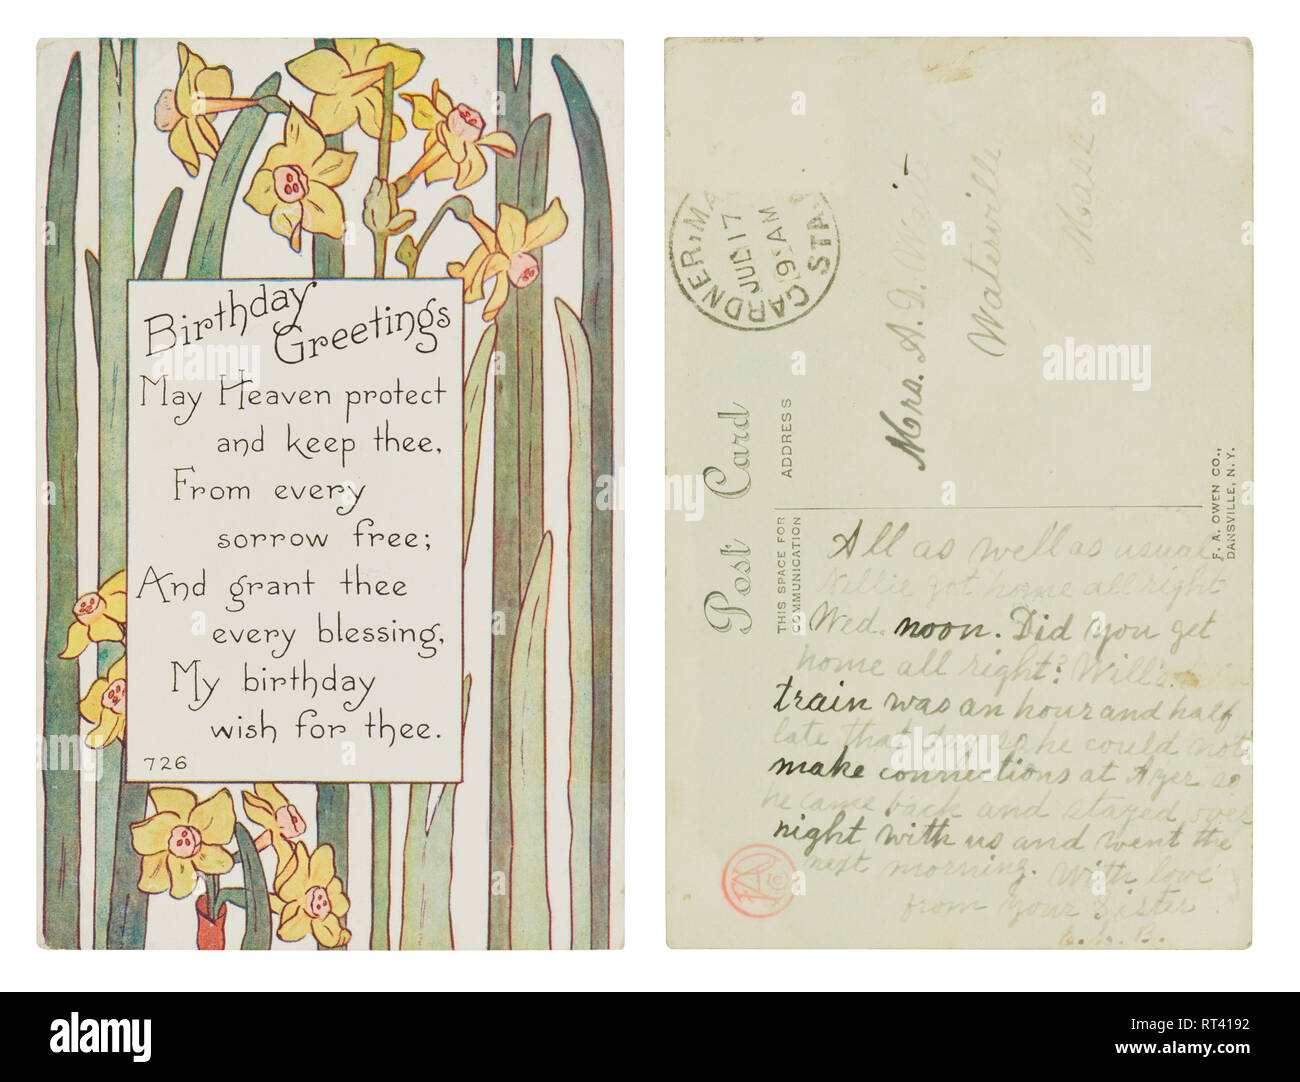 Birthday greetings card from 1917 sent to Watsonville, Mass from Cardner, Mass. Stock Photo